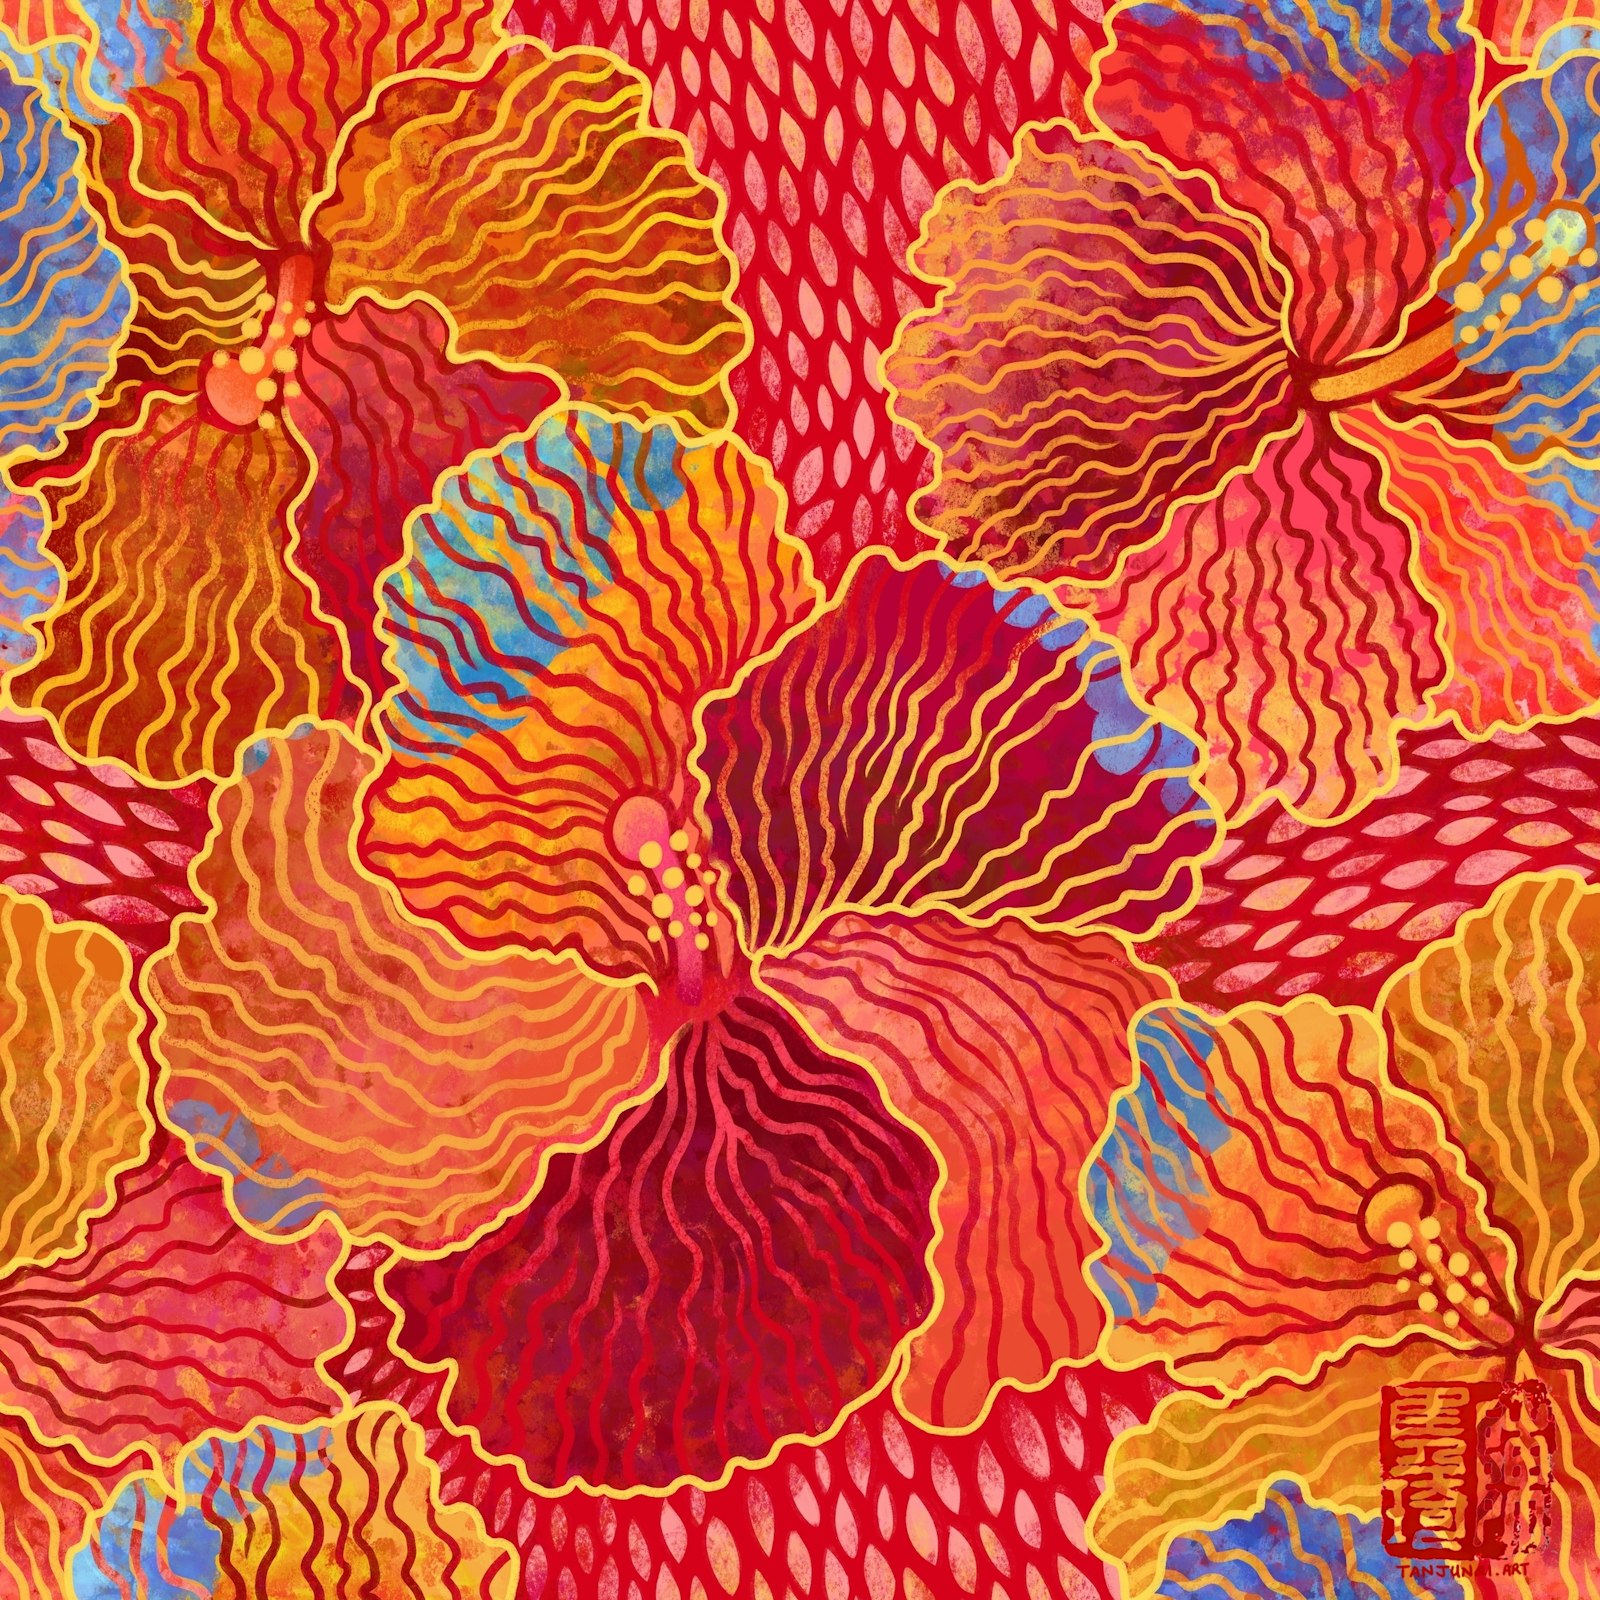 Digitally painted floral design of overlapping red hibiscuses, done in a slightly graphic and textured style inspired by batik and Chinese papercuts. The hibiscus are different hues of red and magenta, while the outlines are golden, and their overlapping parts are blue, against a background with a light pink pattern.